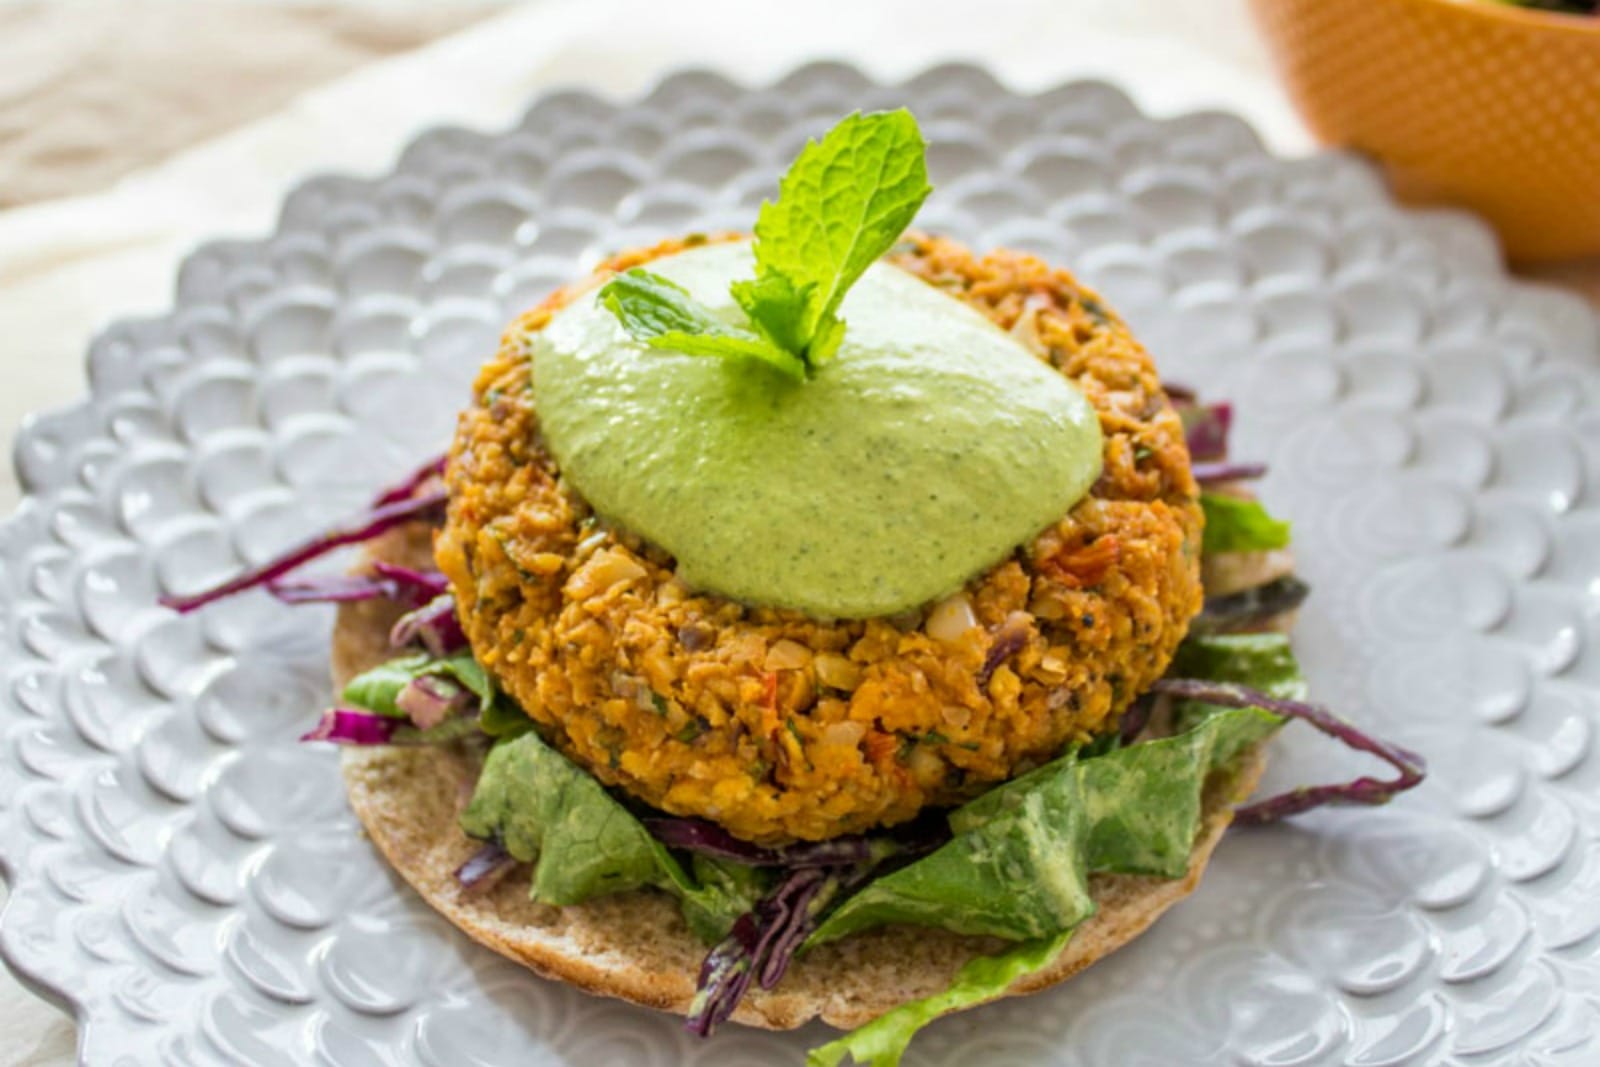 25 Delicious Vegan Sources of Protein (The Ultimate Guide!)